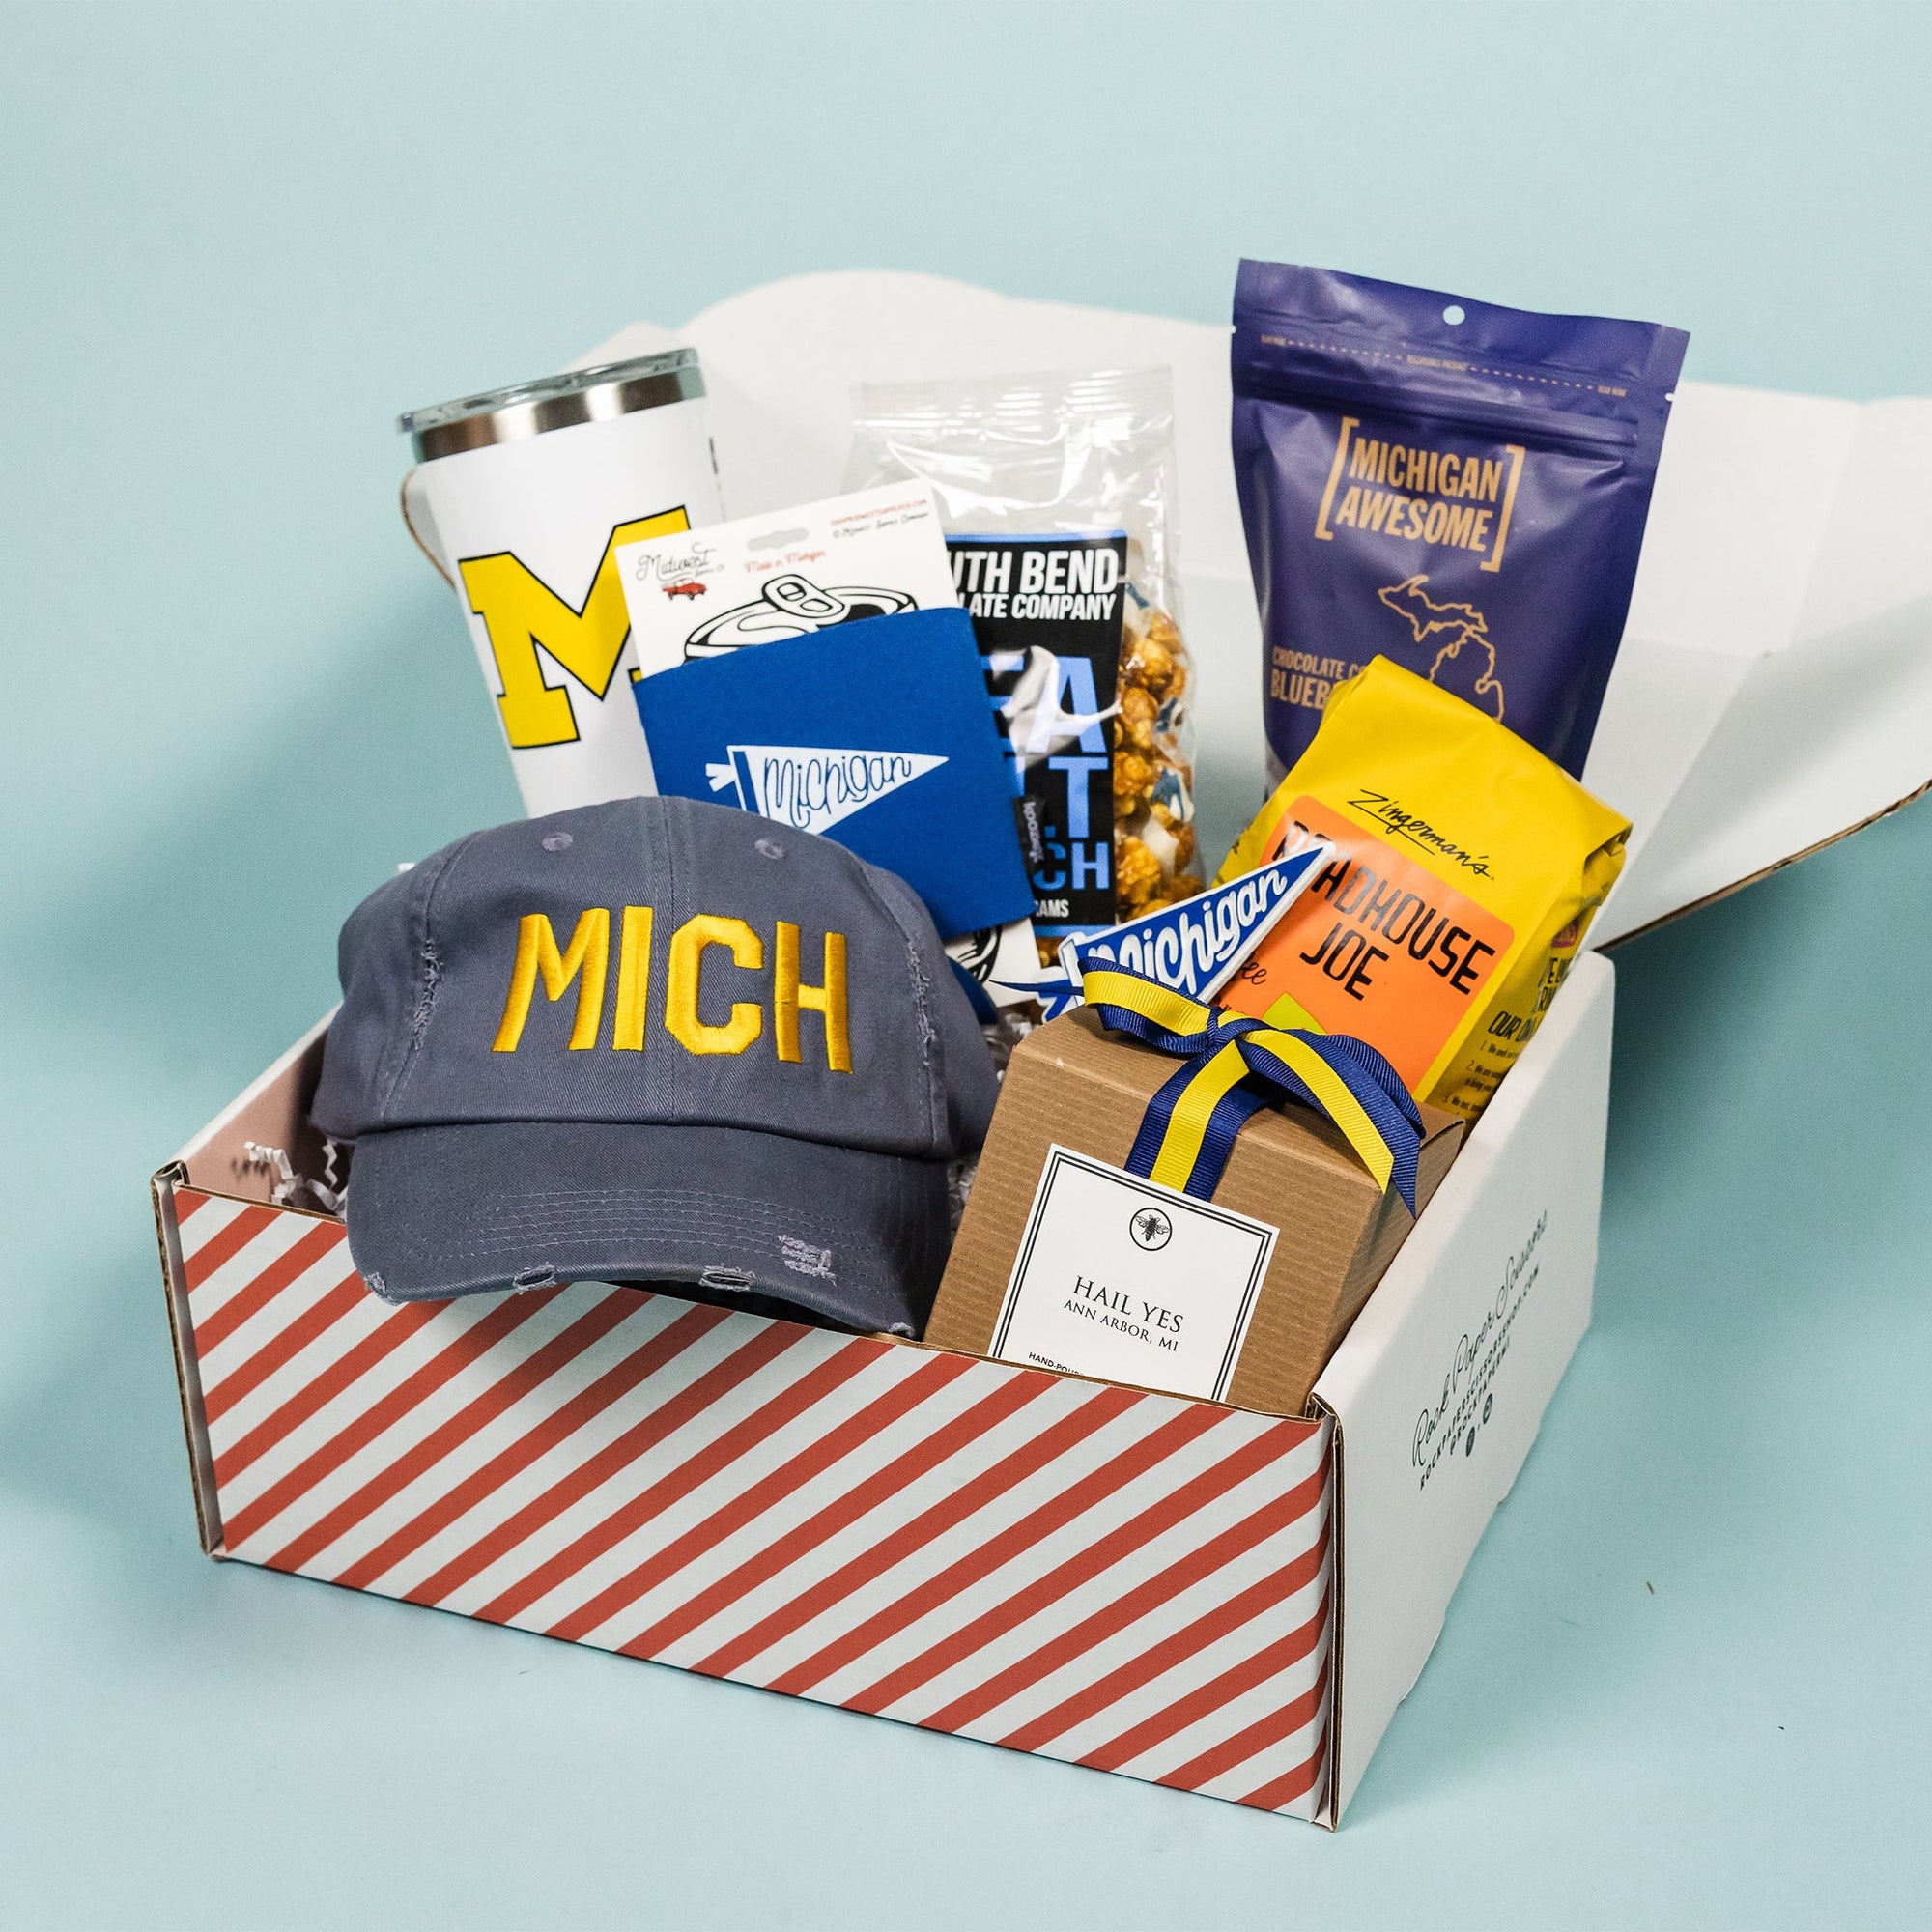 On a calming blue background sits a red and white striped box filled to the brim with U of M gifts. It includes a distressed navy ballcap that says "MICH" in maize, a 20 oz white liscensed block M Corkcicle, RPS exclusive "Hail Yes" hand-poured candle, Zingerman's Roadhouse Joe coffee beans, Michigan Awesome chocolate covered blueberries, South Bend Chocolate Sea Salt Caramel Corn, RPS Exclusive blue Michigan pennant koozie and blue pennant Michigan magnet.